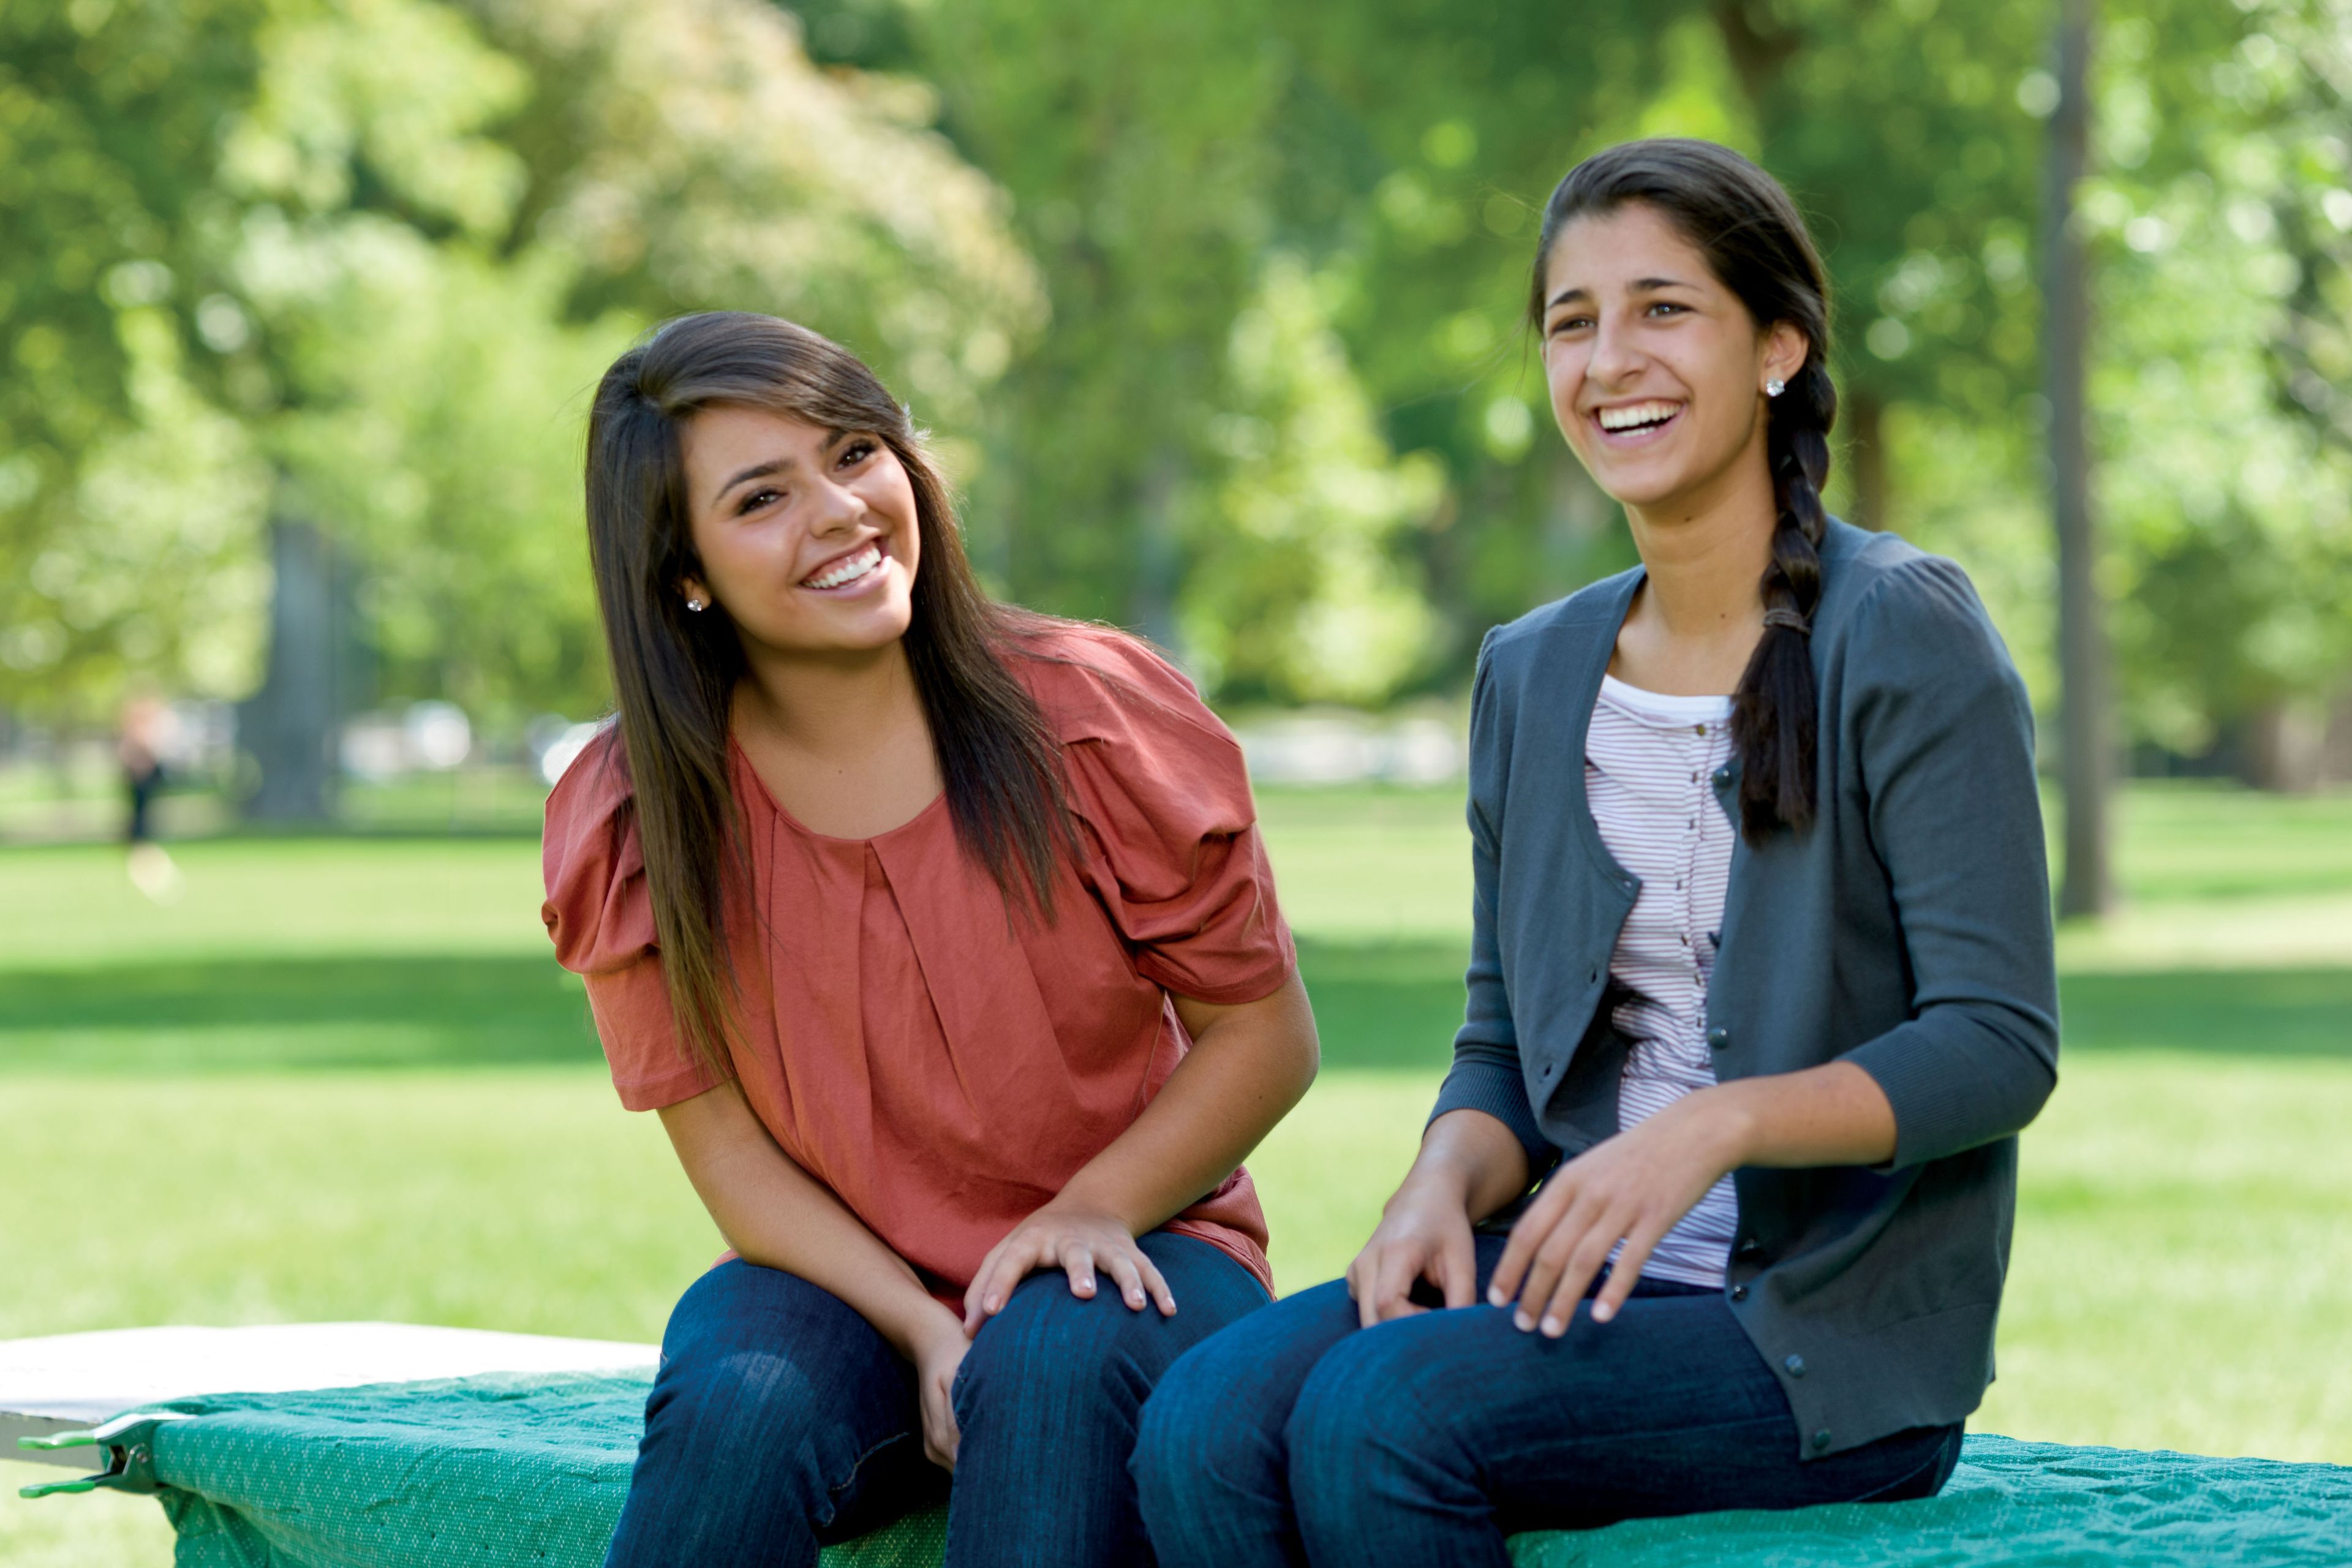 Two young women sitting together in a park.  They are laughing.